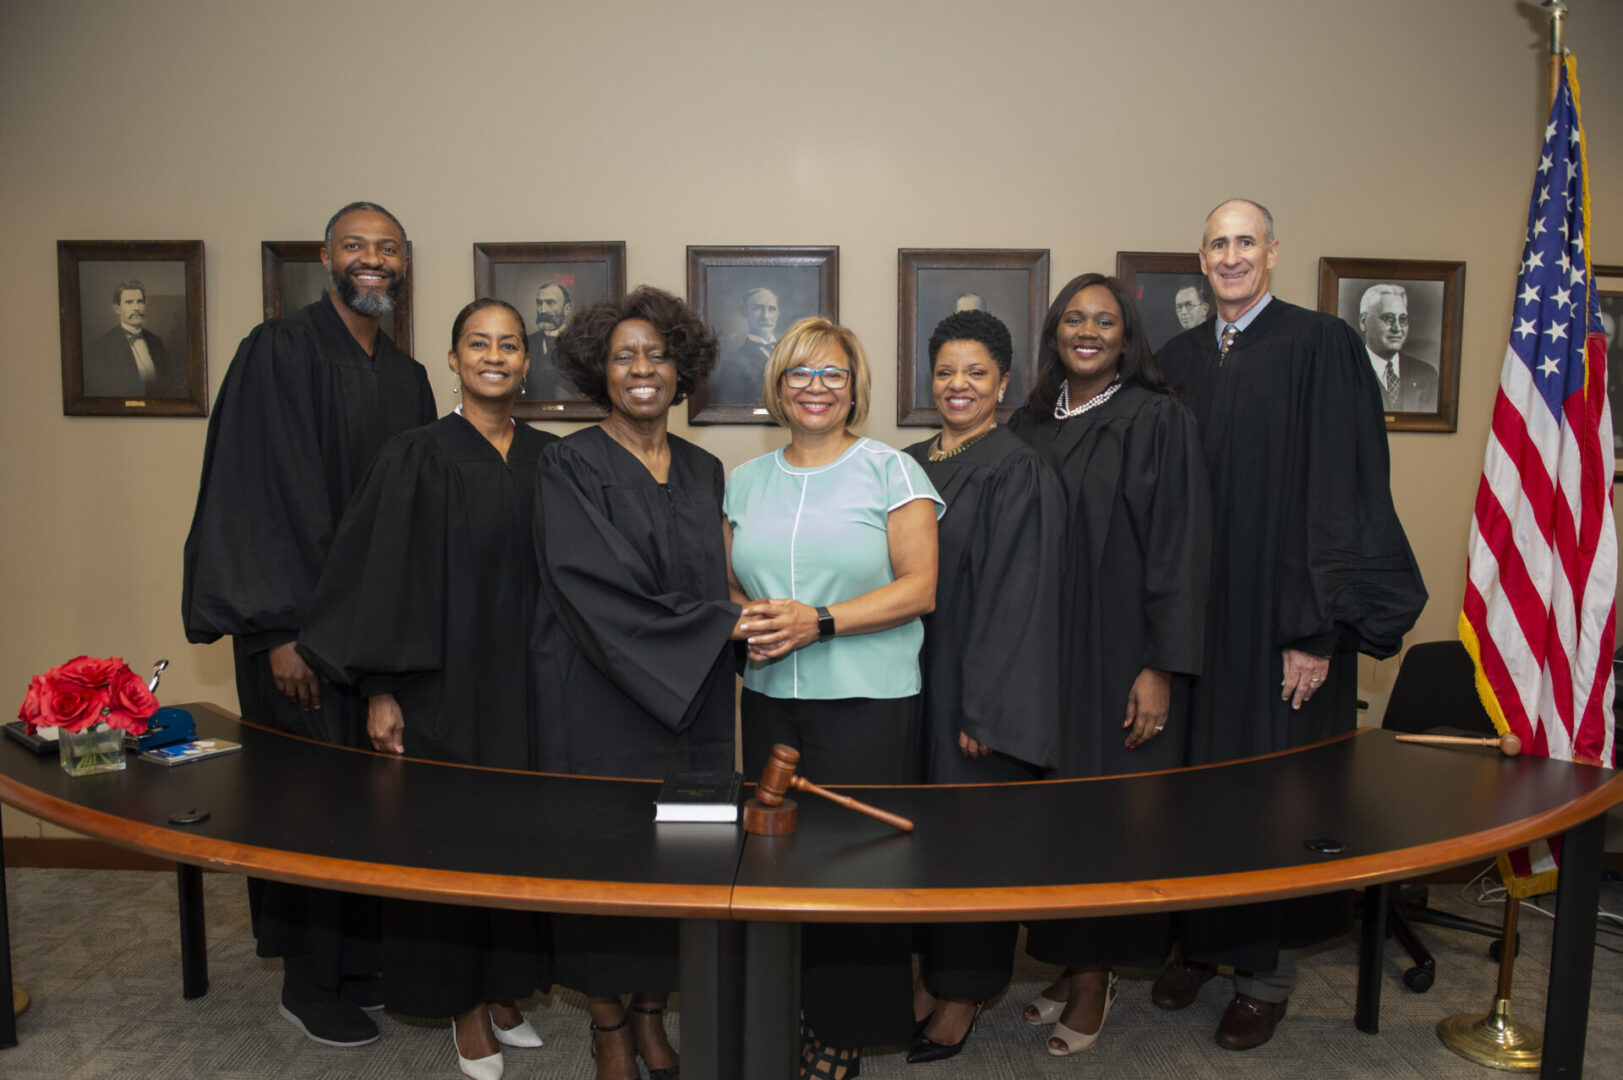 Special Oath of Office Ceremony Judy H Williams Honorary Magistrate 8-23-19 by Jon Strayhorn